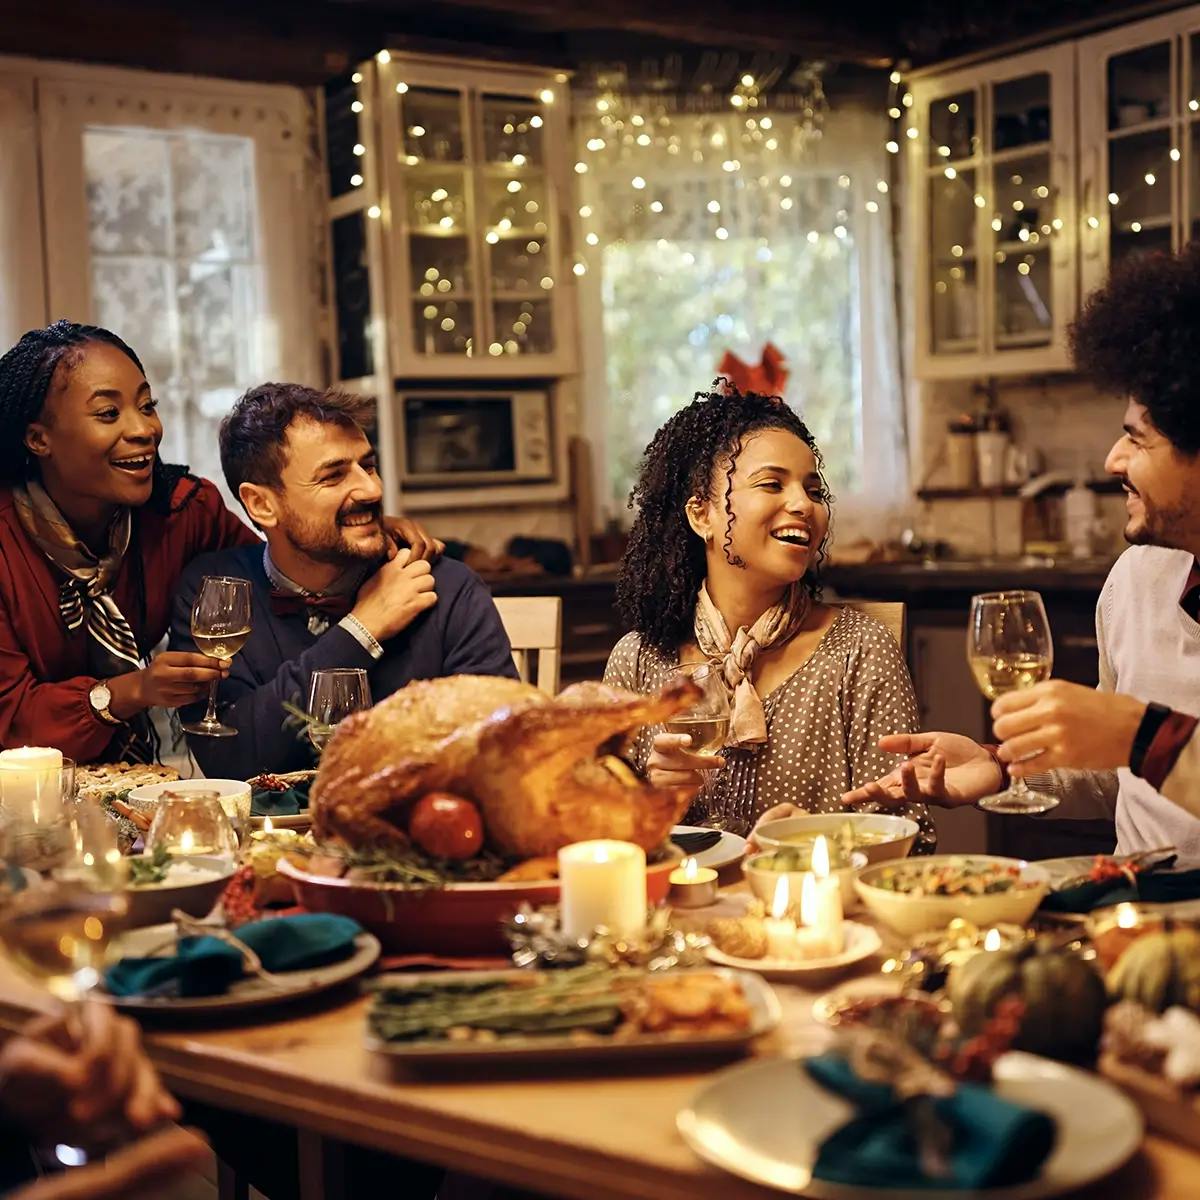 Multi-racial group of people eating Christas dinner and celebrating Christmas on a budget.